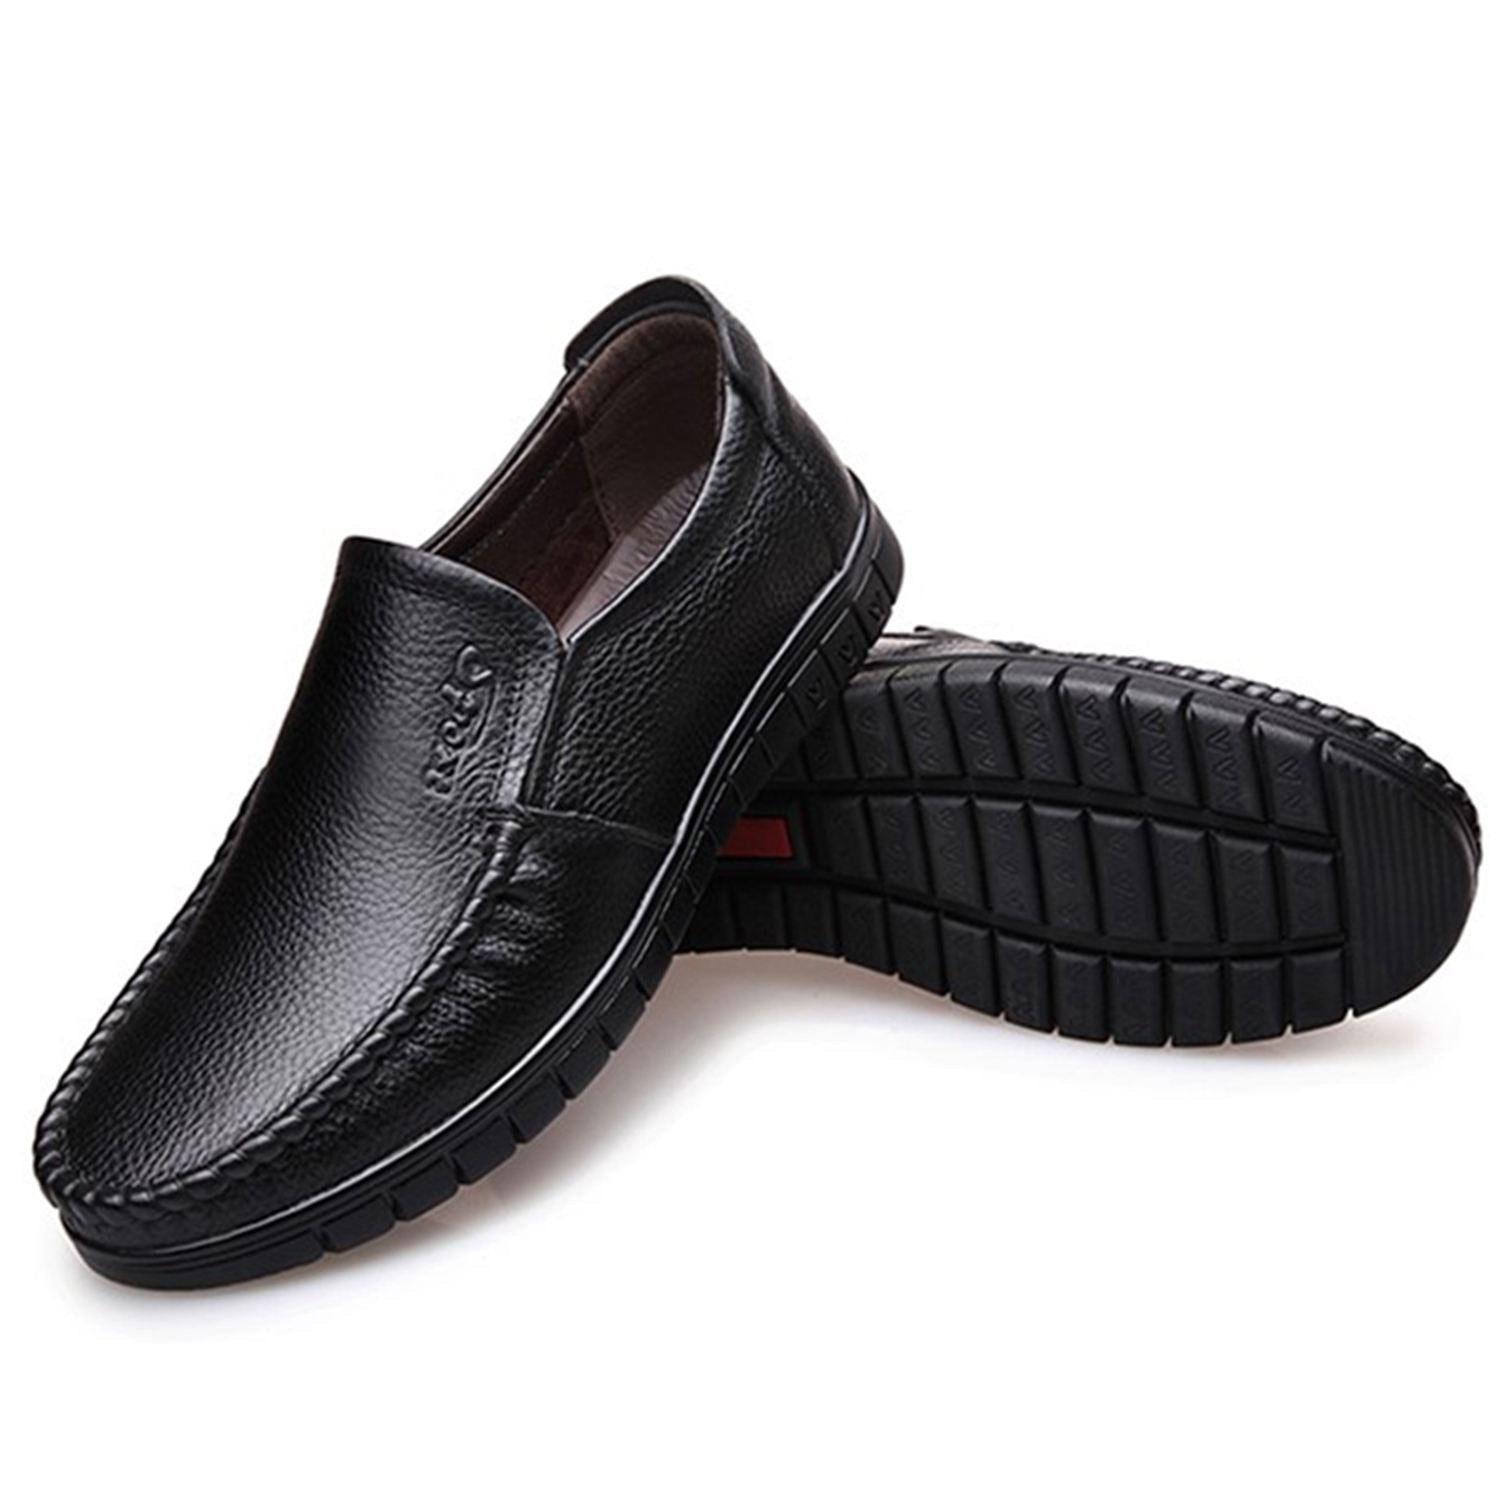 Men Soft Leather Loafers 2018 Spring Summer Male Casual Shoes Genuine Leather Moccasin Flat Breathable Driving Shoe - ebowsos